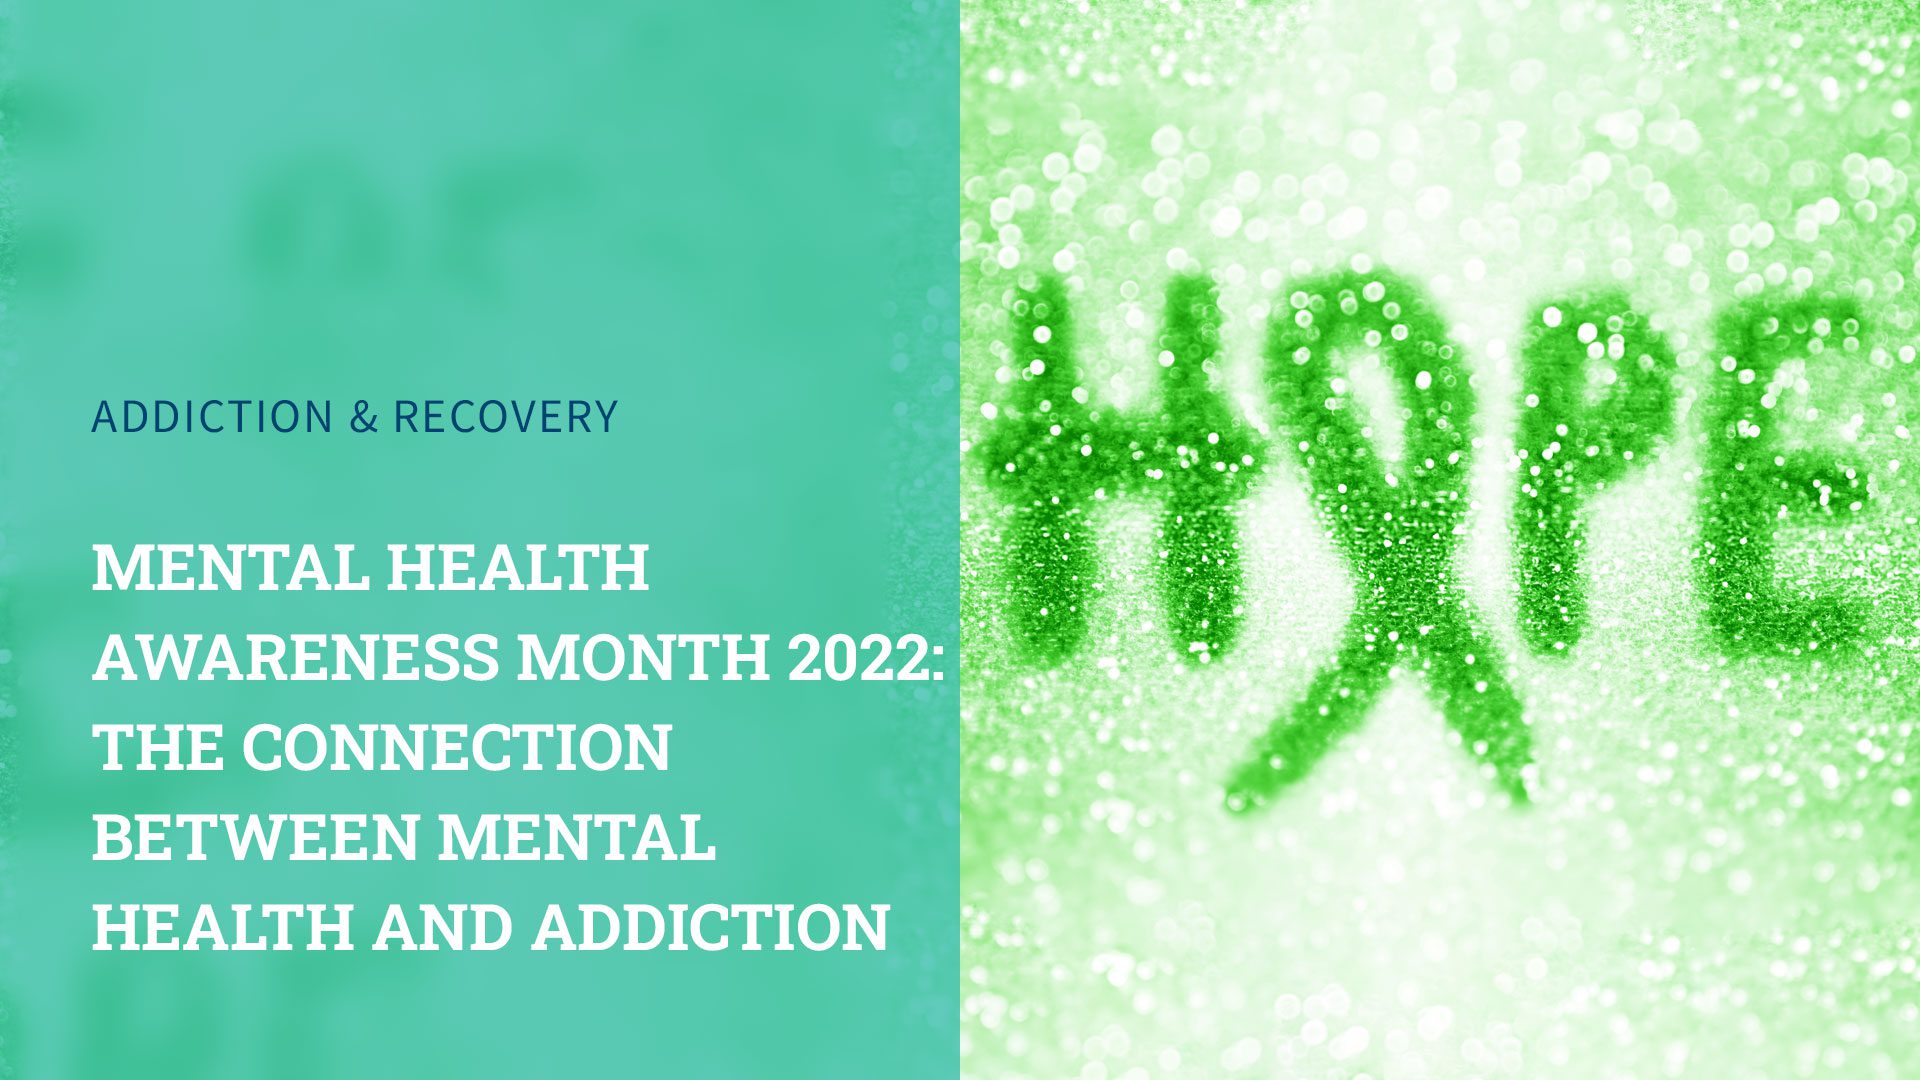 Mental Health Awareness Month 2022: The Connection Between Mental Health and Addiction